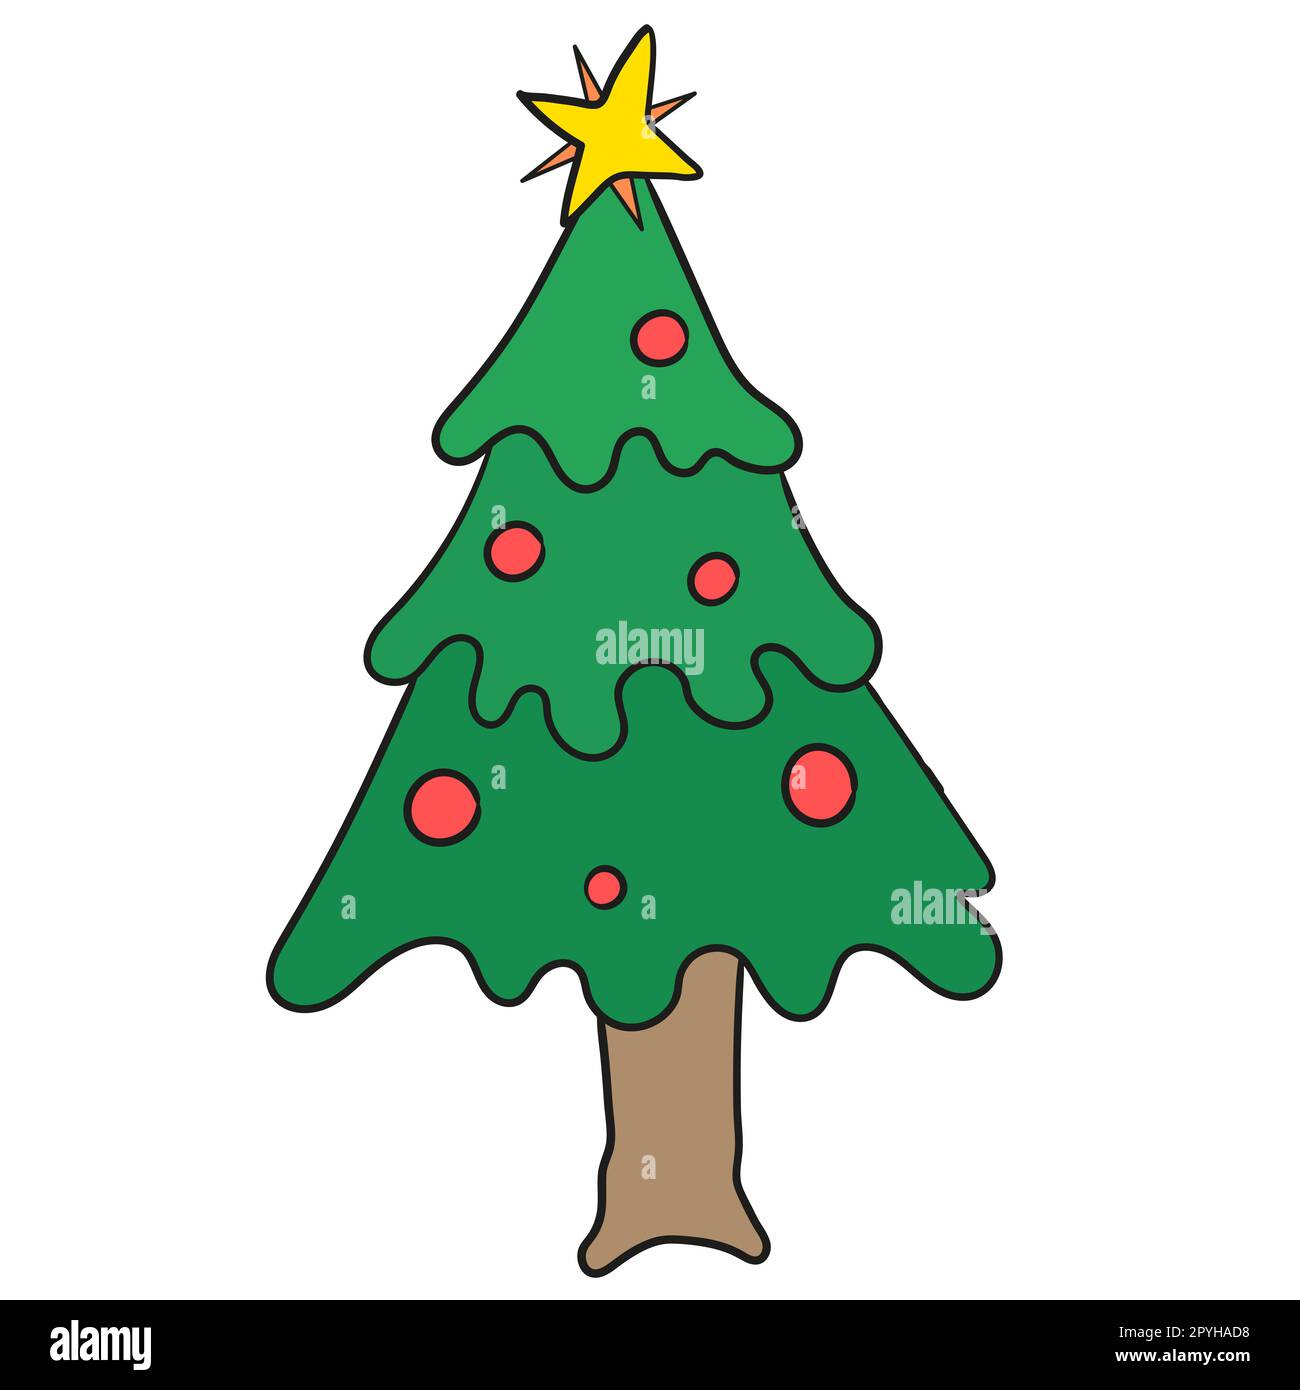 Christmas tree is full of very large decorations. doodle icon image Stock Photo